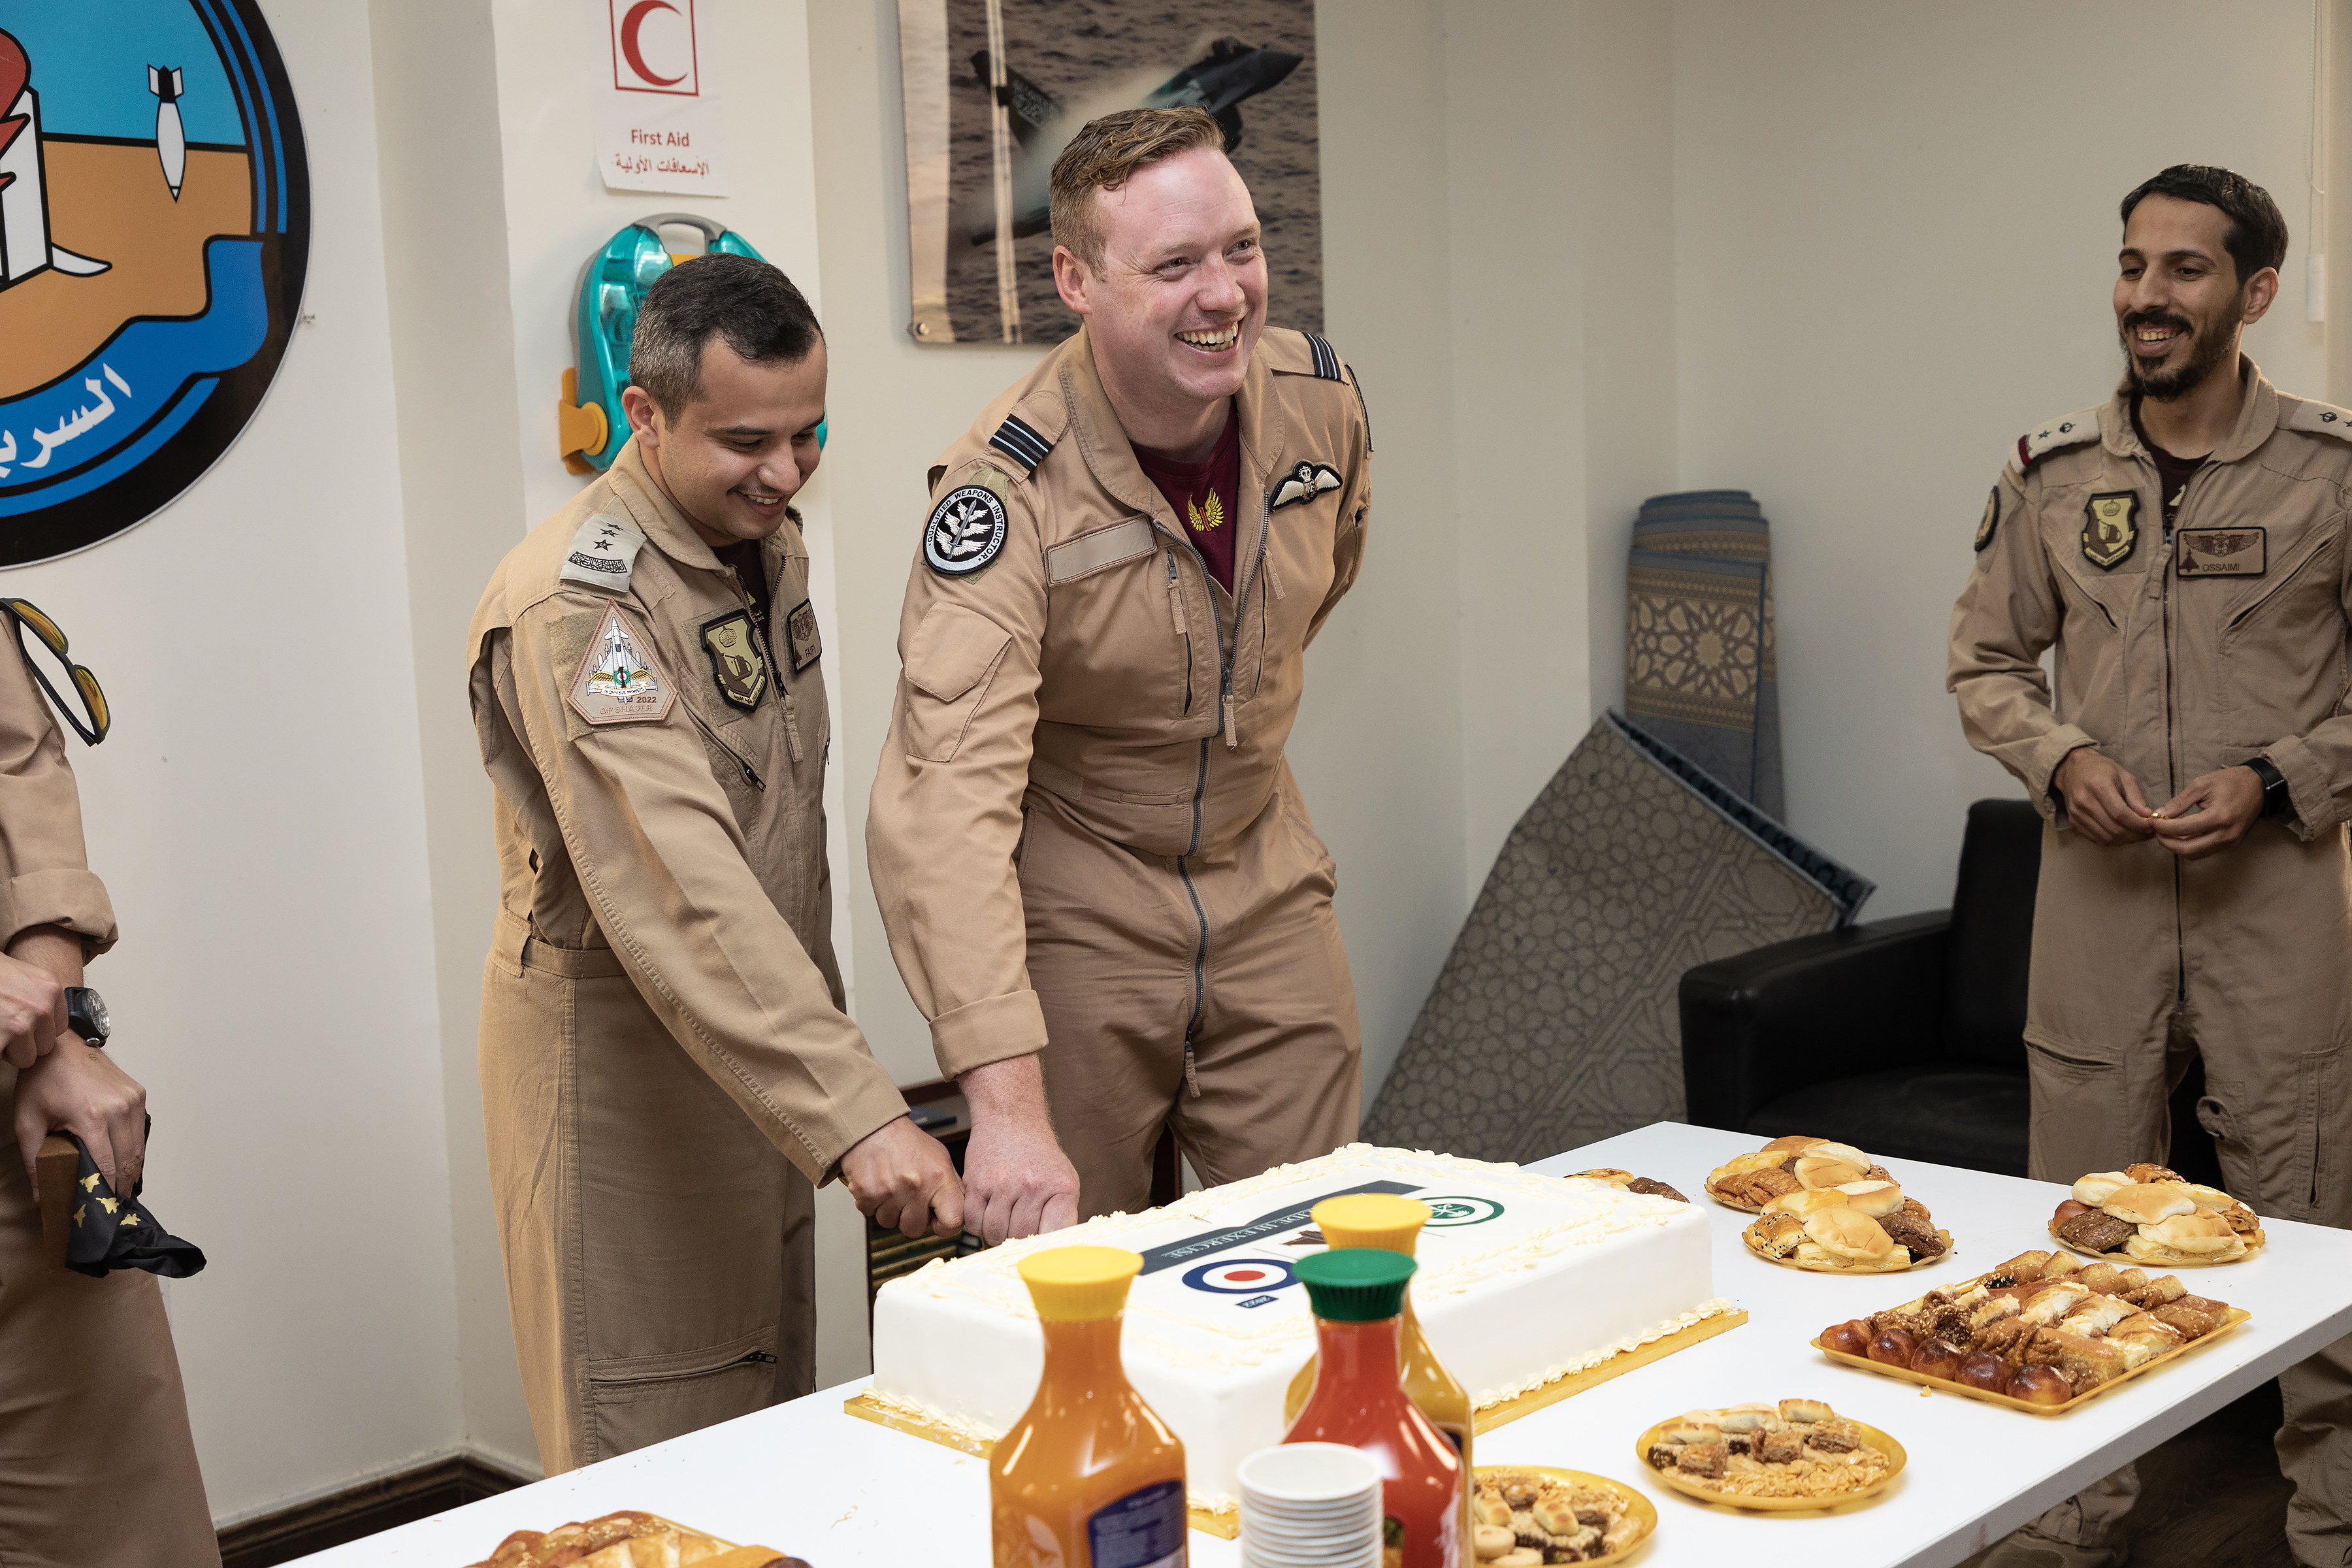 Image shows personnel cutting a cake on a table with Arabian dishes and sauces.